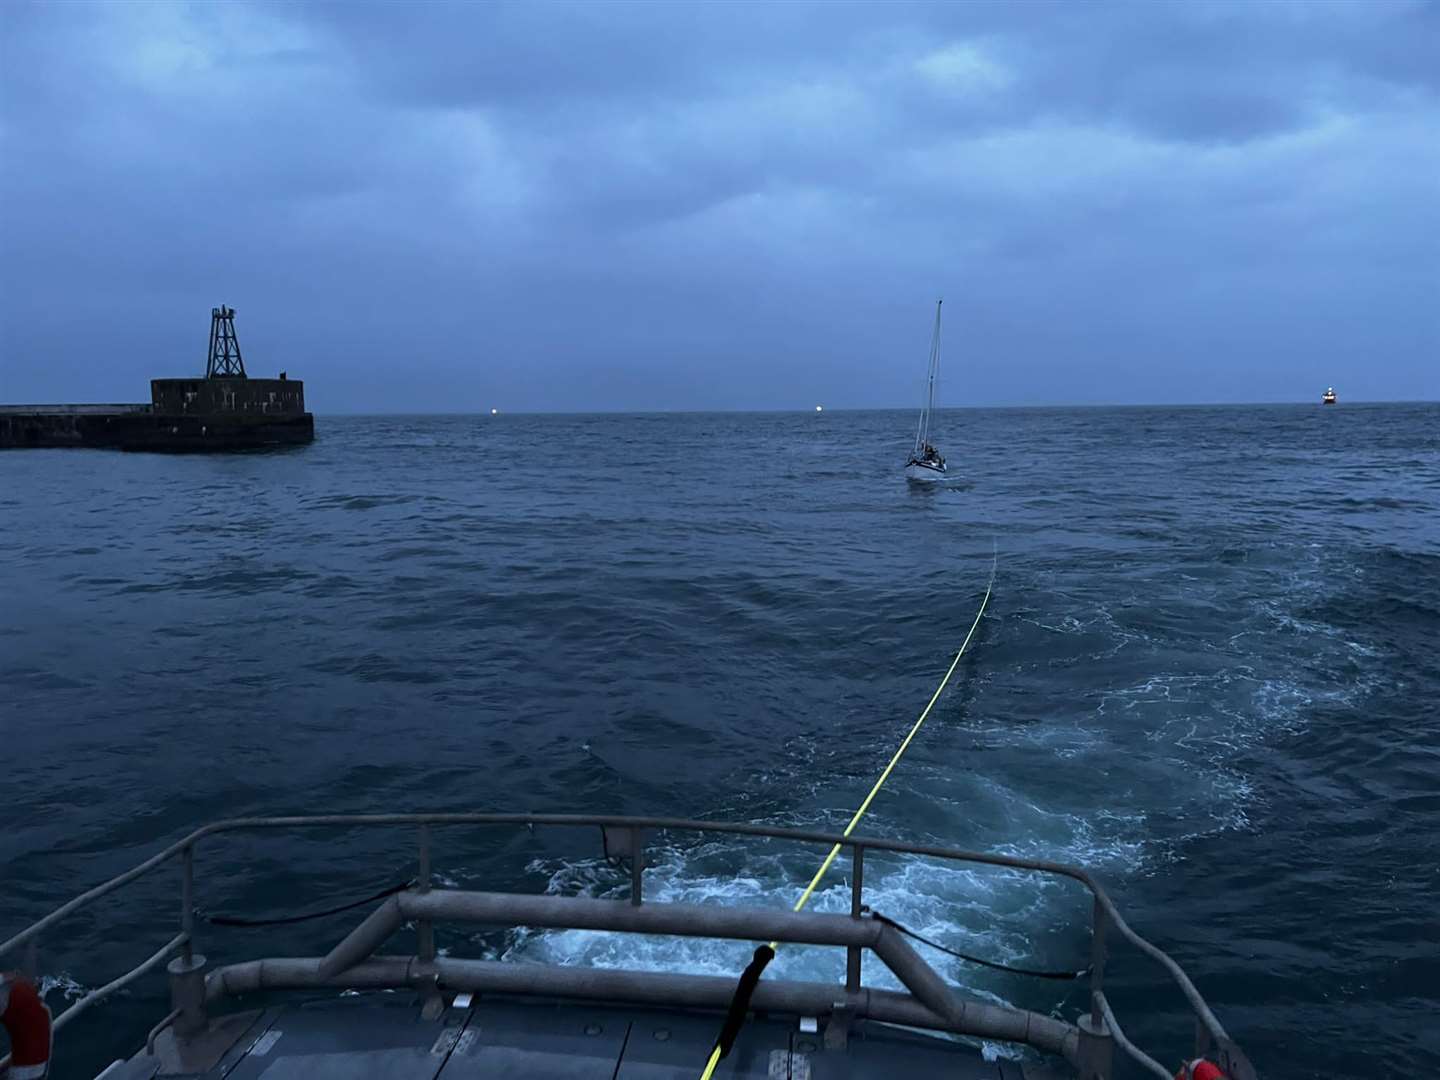 The Peterhead lifeboat towed the stricken yacht to safety. Picture: Peterhead RNLI